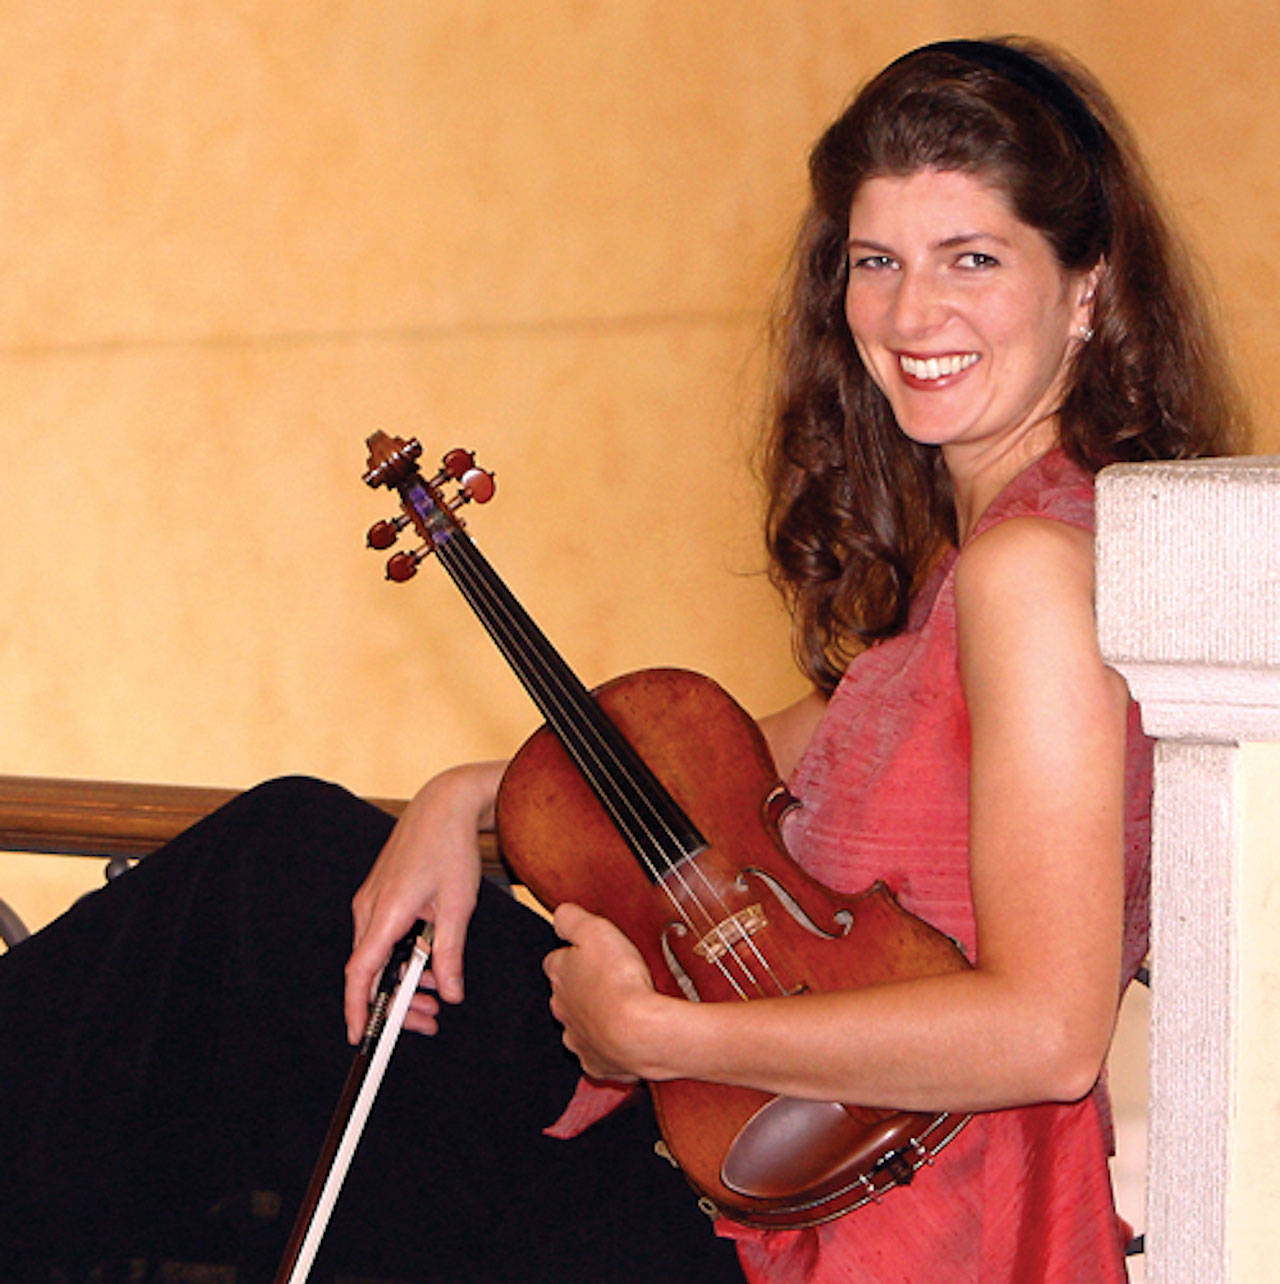 Monique Mead of the Carnegie Mellon University School of Music will lead the Port Angeles Symphony’s Summer Strings Camp this August. The program culminates in two public concerts in and near Port Angeles. Submitted photo